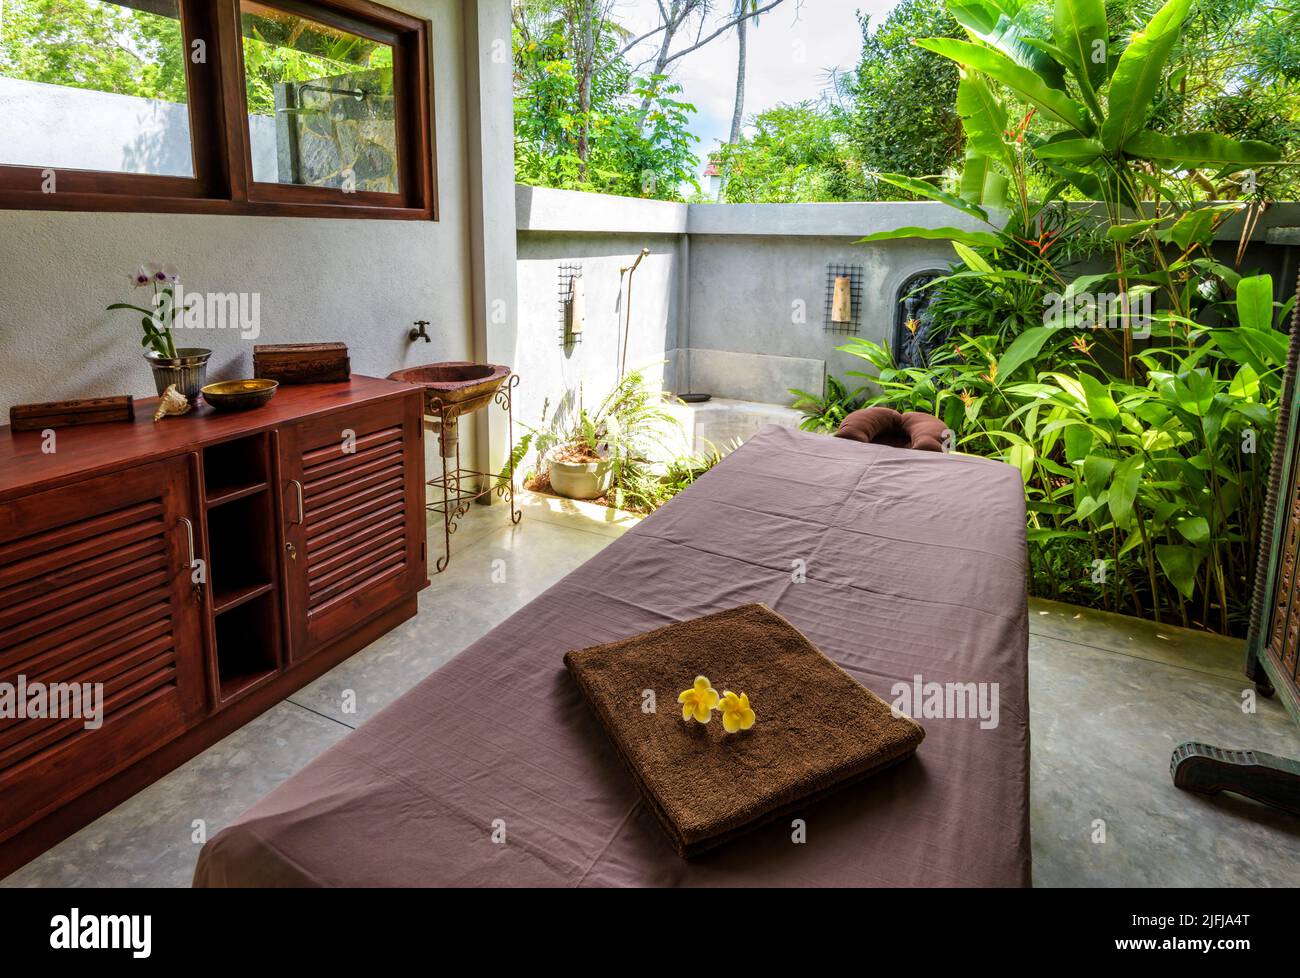 Sri Lanka - Nov 4, 2017: Beauty salon interior in tropical resort, massage bed in spa or wellness center on beach. Inside cosmetology room in Indian o Stock Photo